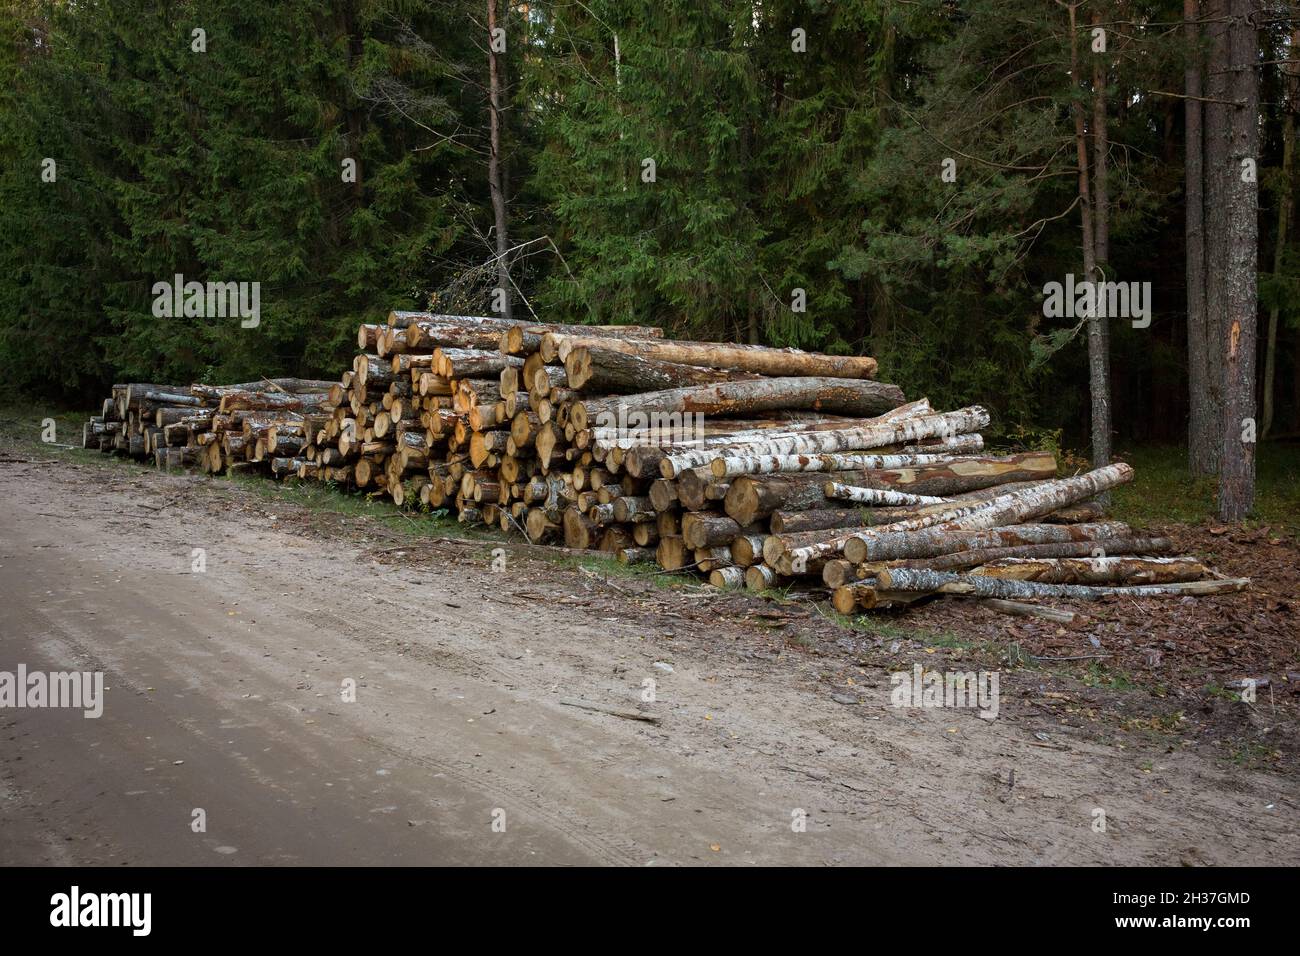 Log stacks along the forest road. Forest pine and spruce trees. Log trunks pile, the logging timber wood industry. Stock Photo